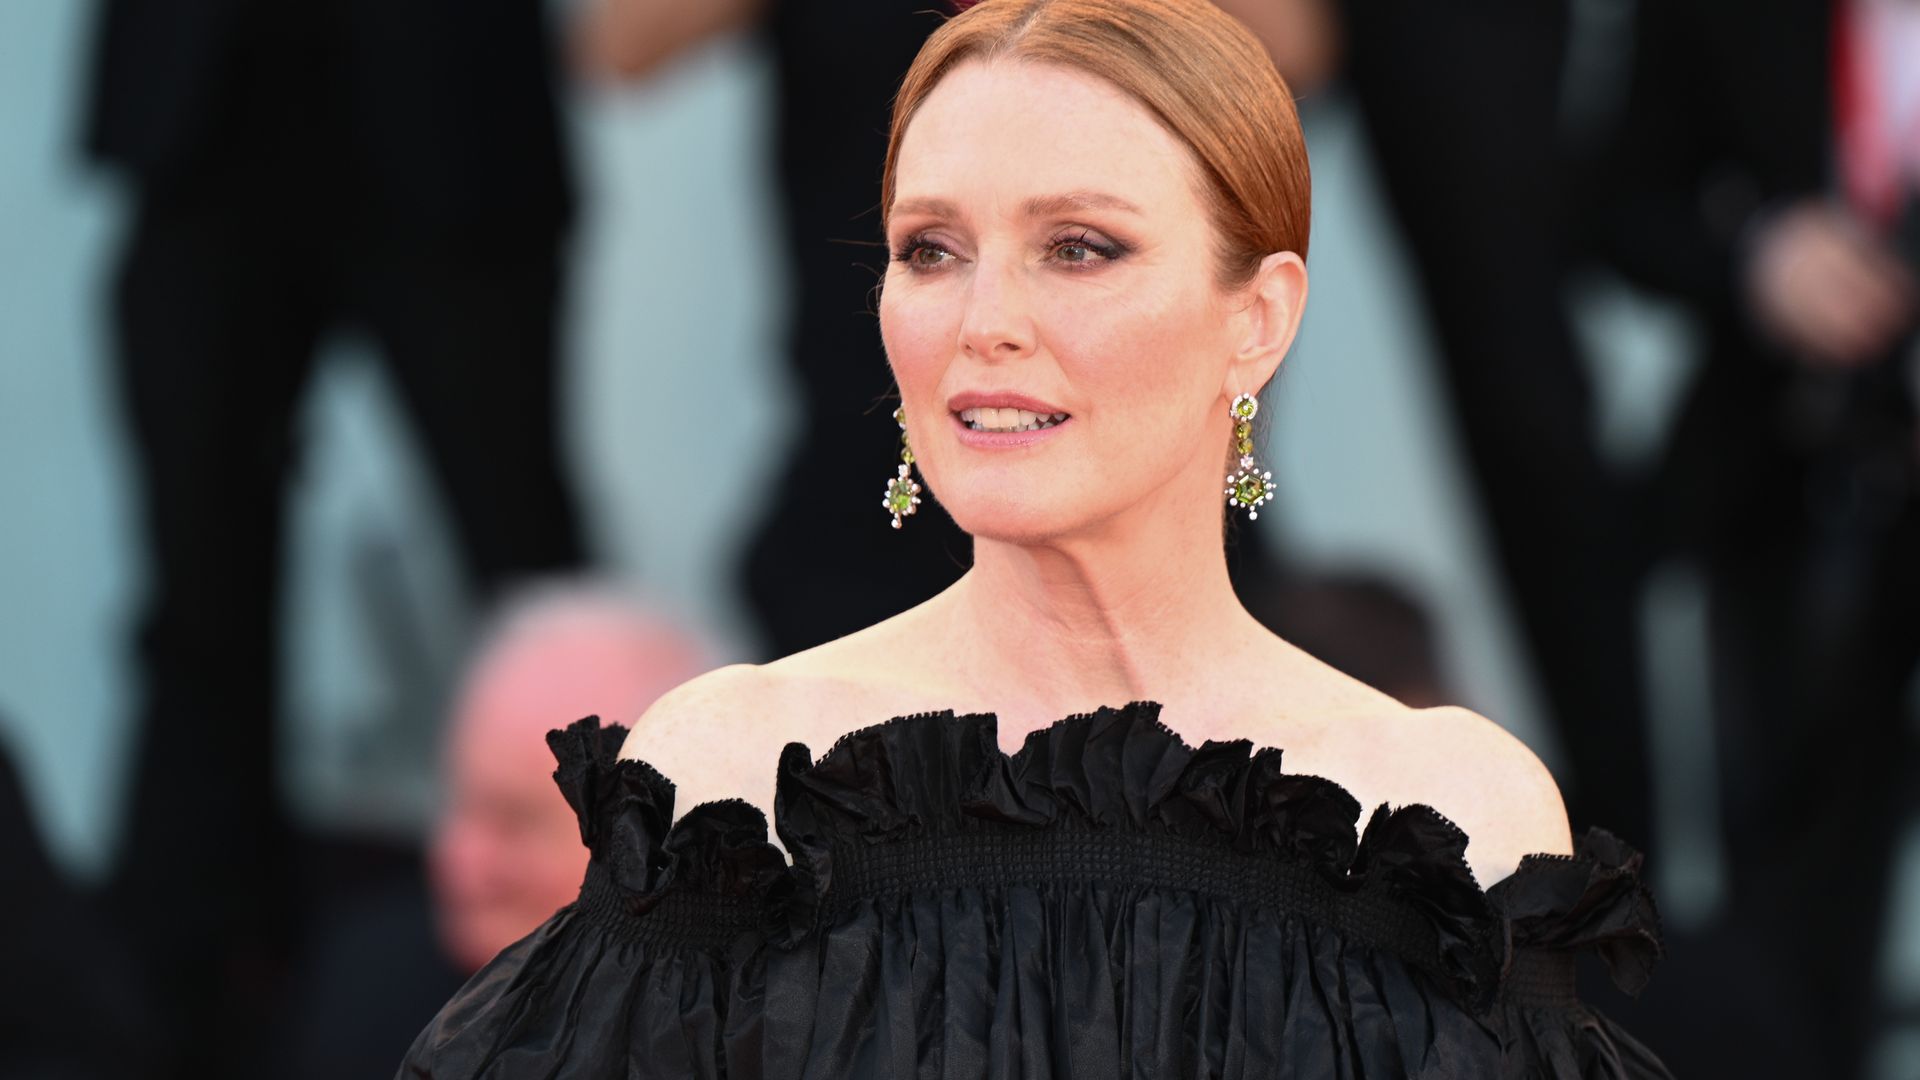 Julianne Moore shares harrowing message as she speaks out against antisemitism